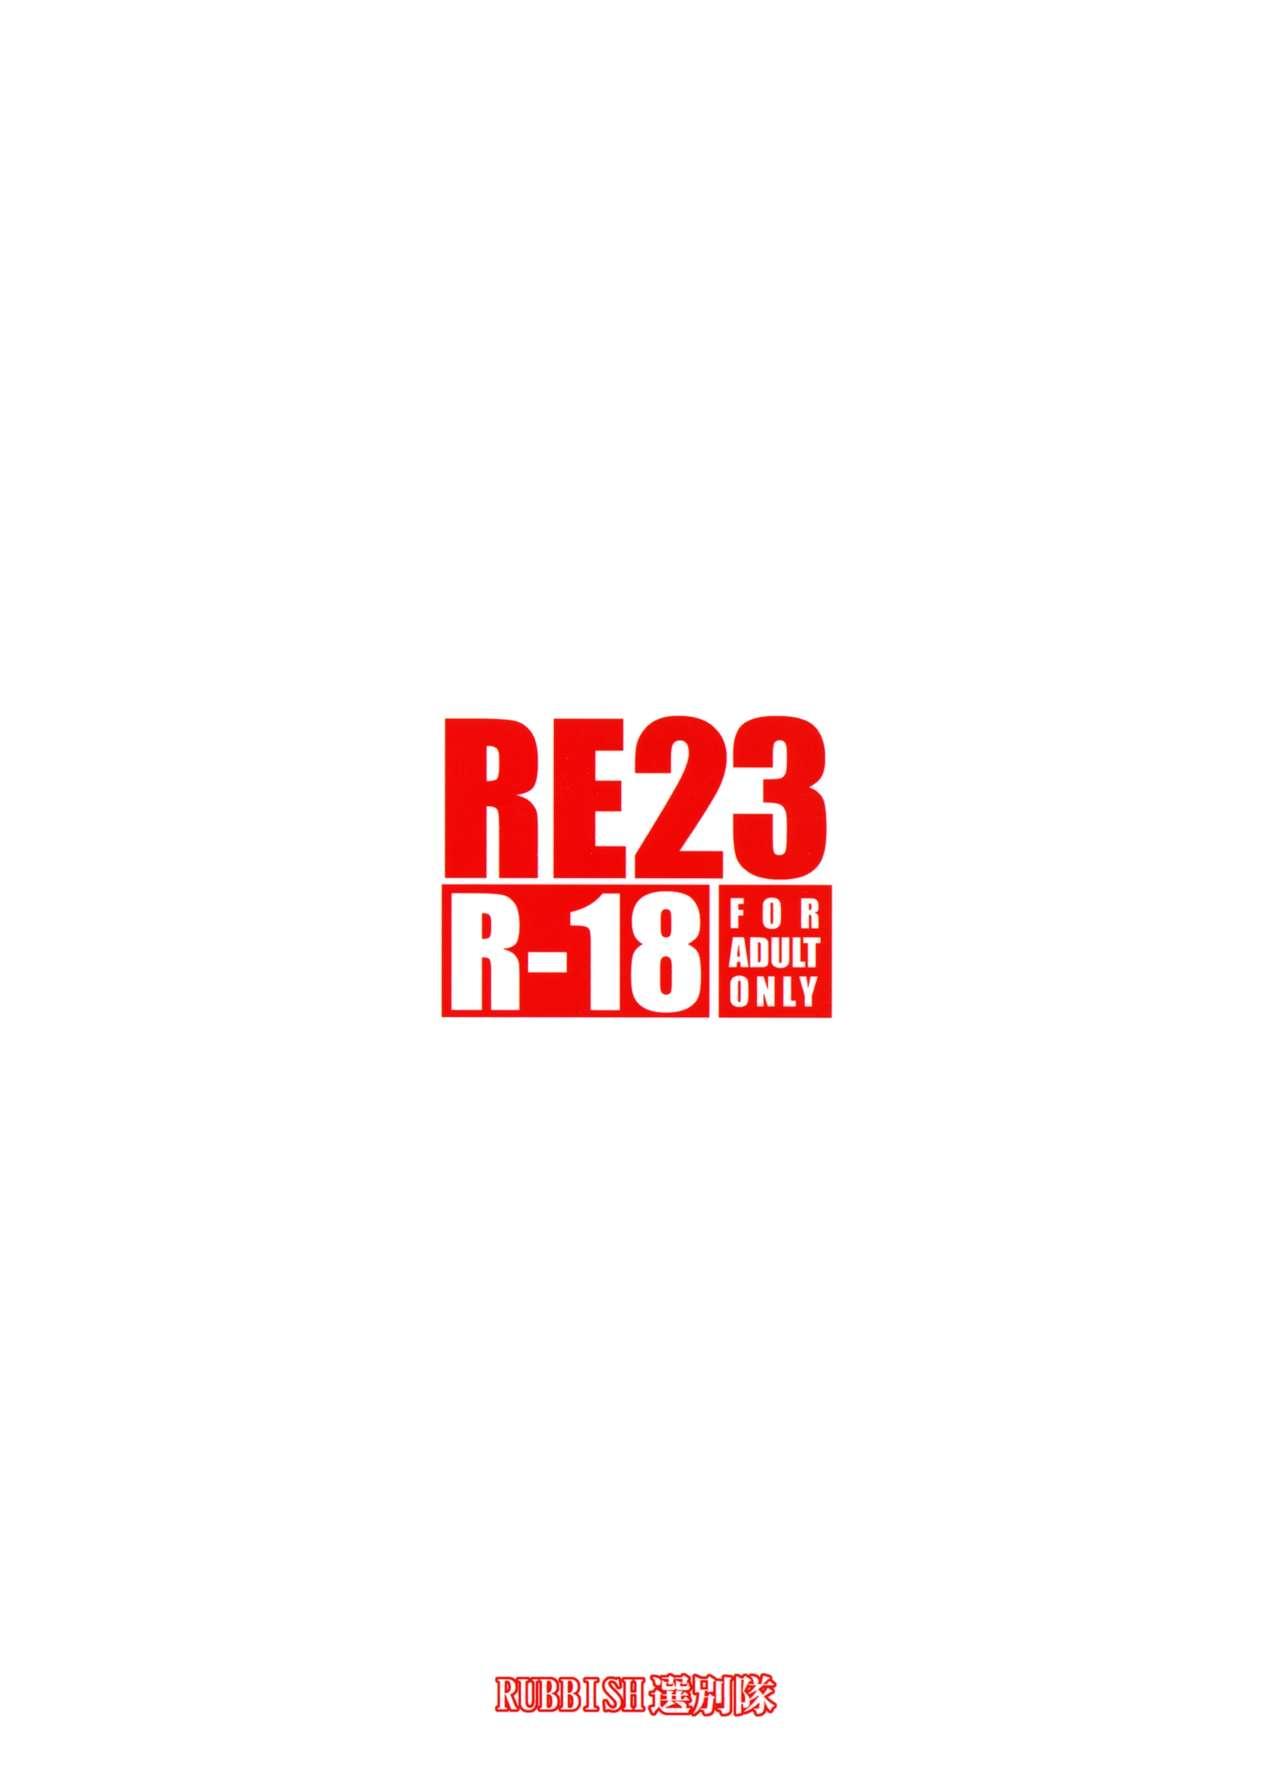 RE 23 31